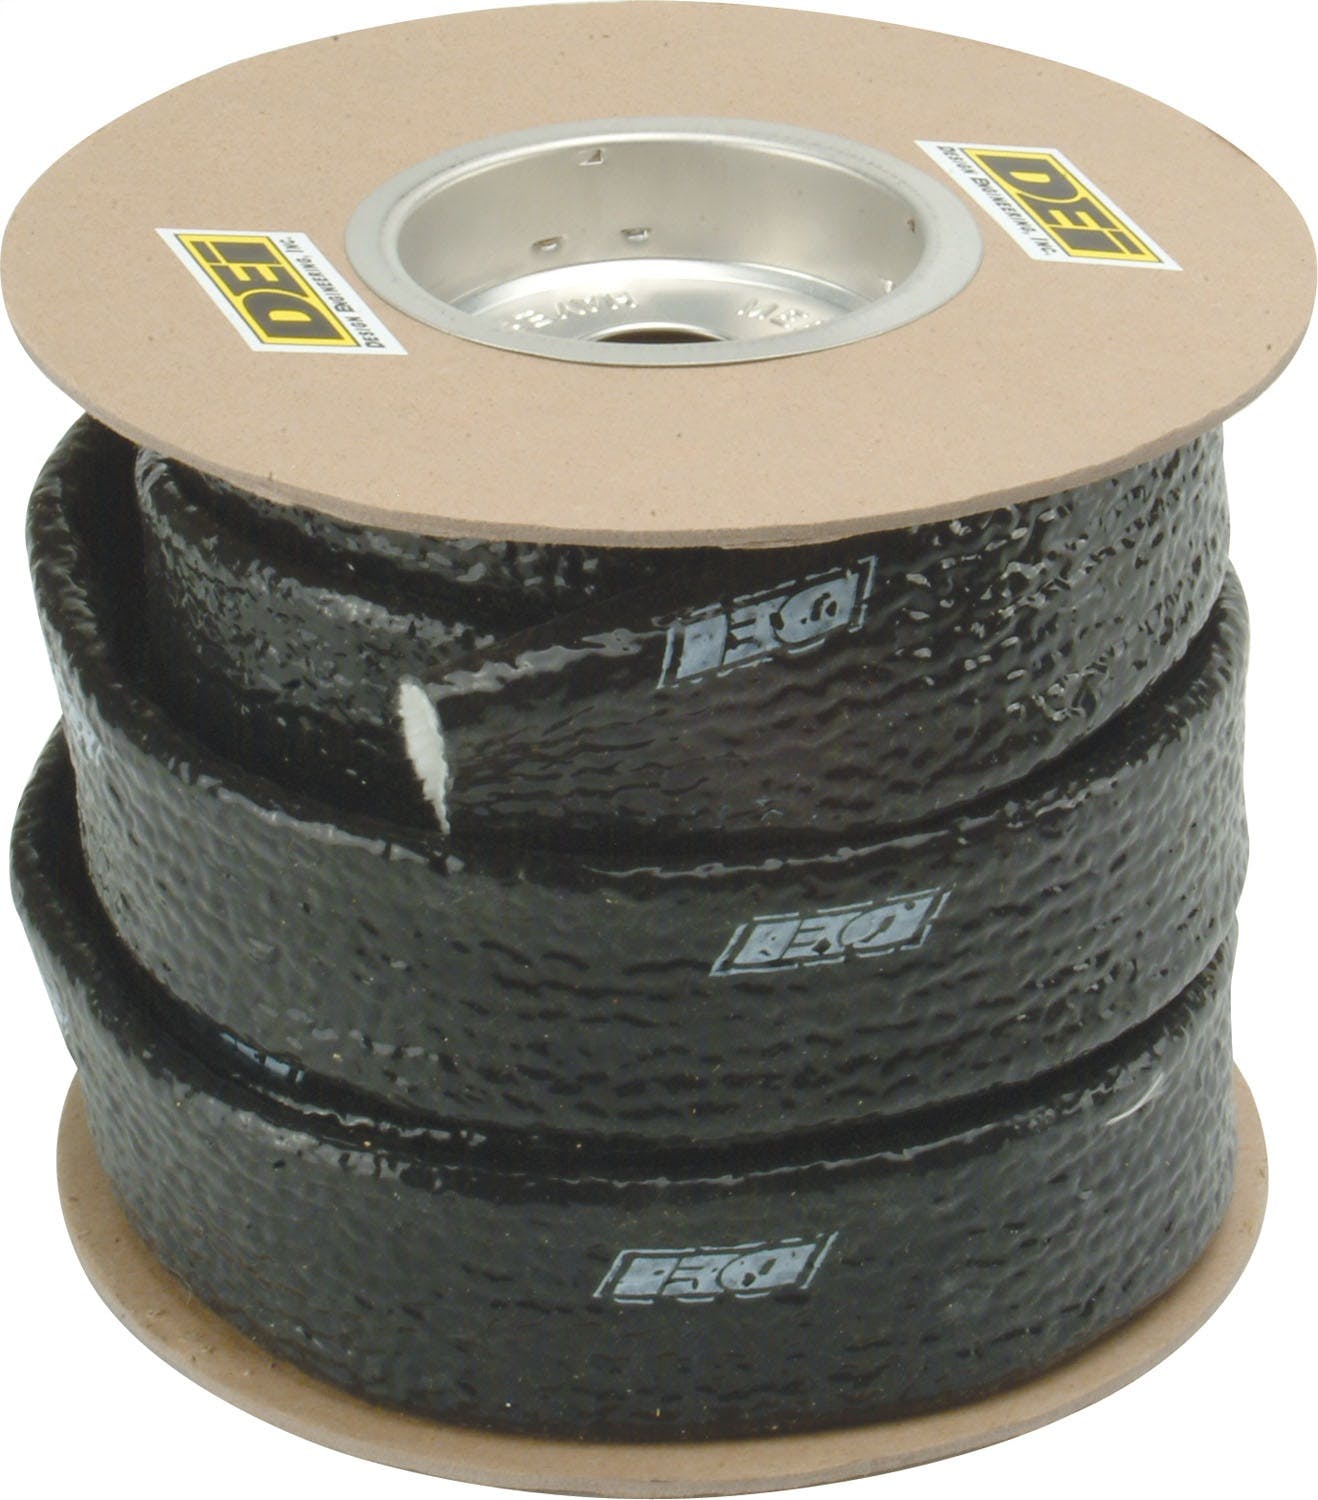 Design Engineering, Inc. 10473 Fire Sleeve and Tape Kit 3/4 I.D. x 3ft